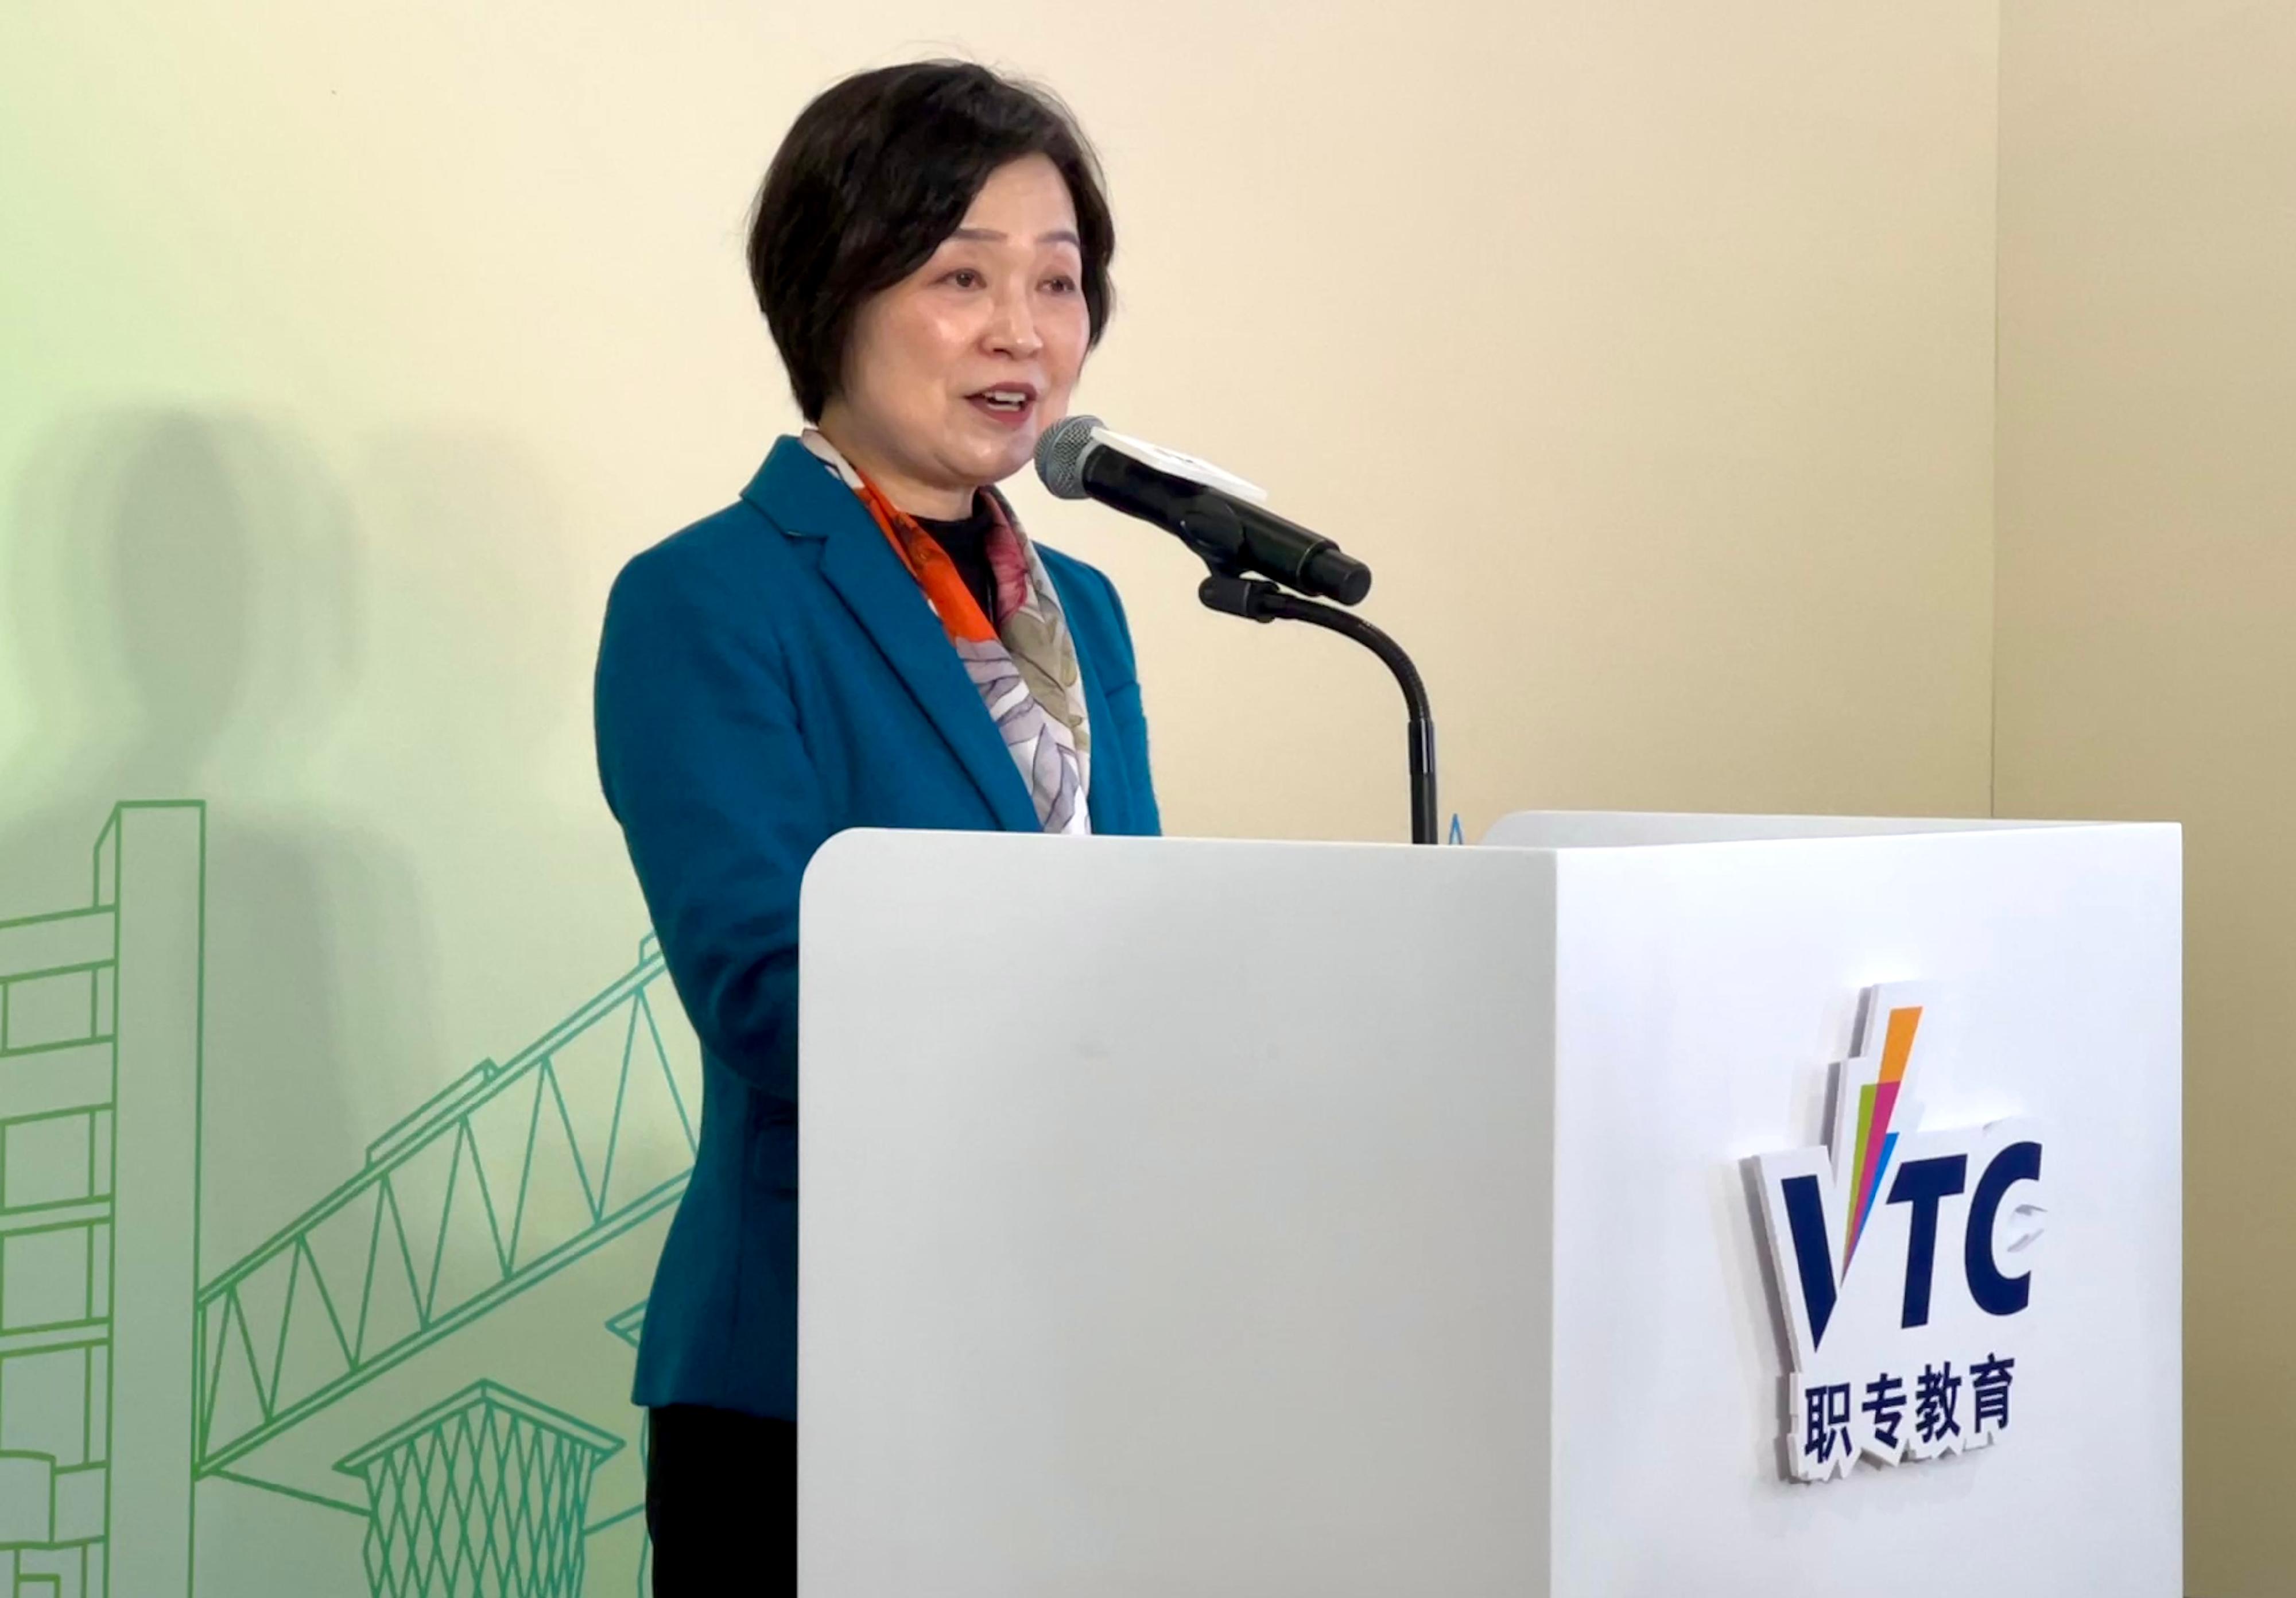 The Secretary for Education, Dr Choi Yuk-lin, delivers a speech at the opening ceremony of Vocational and Professional Education Services (Shenzhen) Company Limited of the Vocational Training Council in Shenzhen today (March 17).